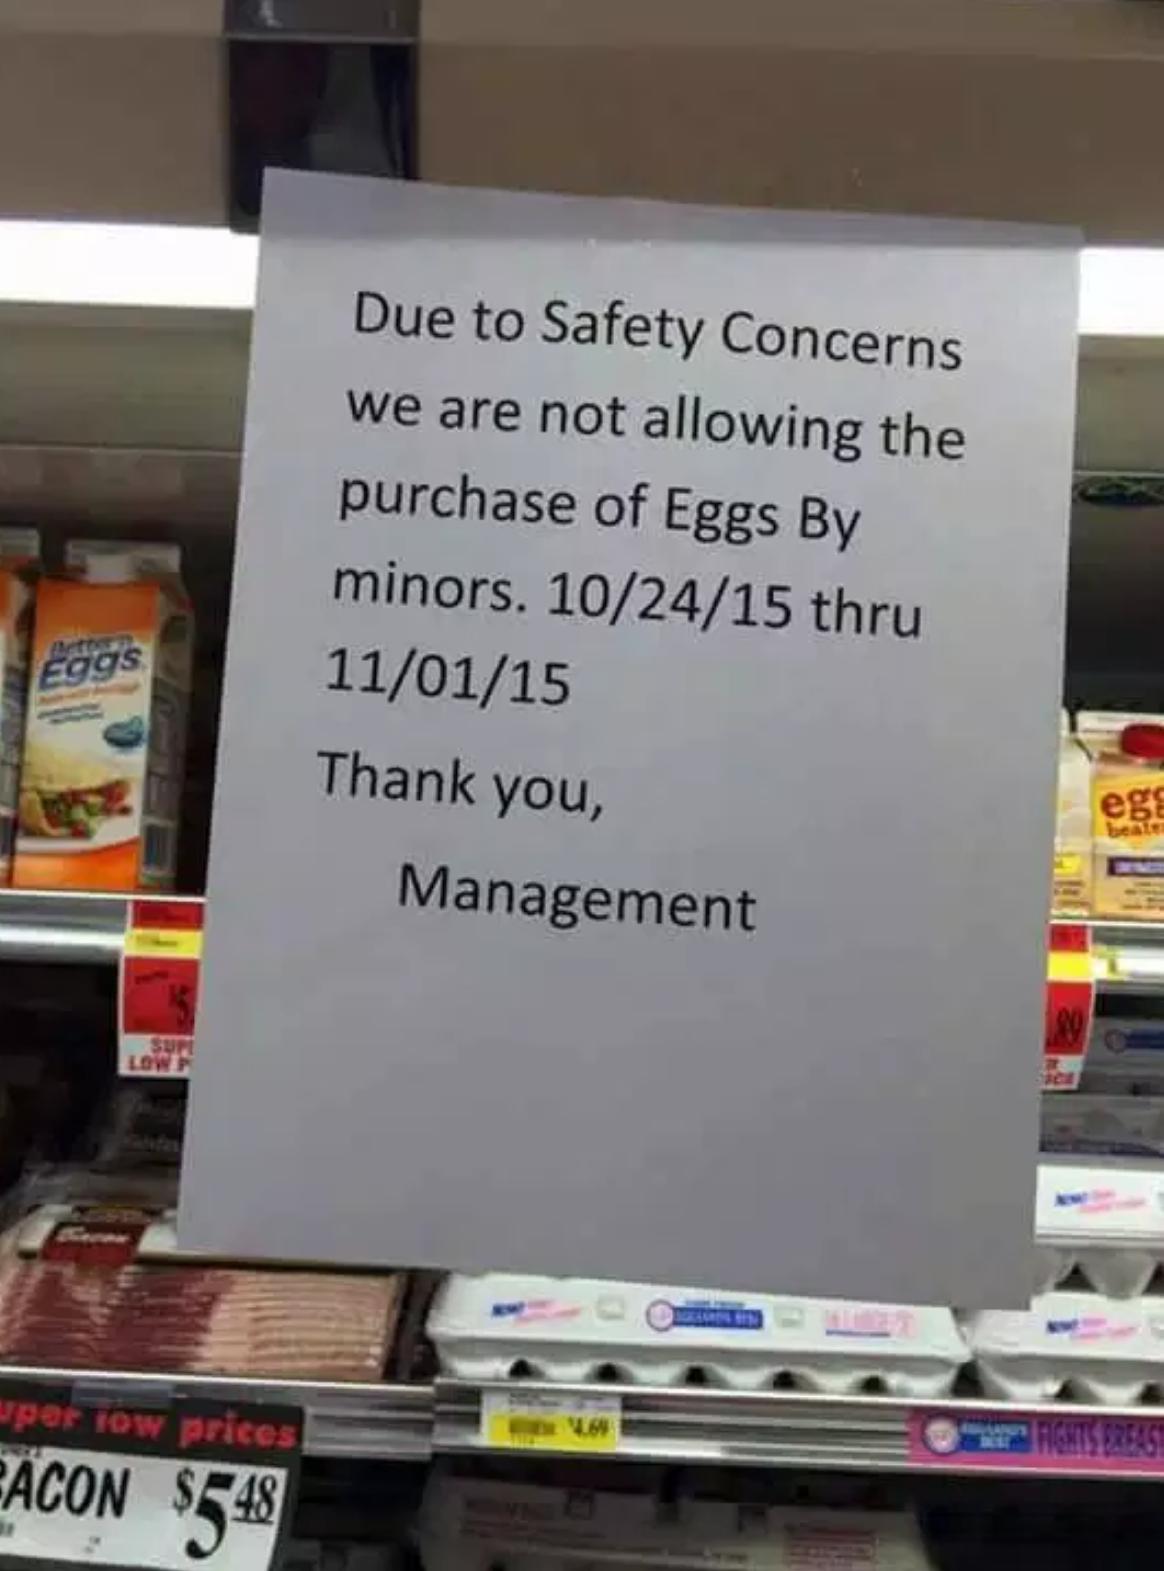 twitter - Due to Safety Concerns we are not allowing the purchase of Eggs By minors. 102415 thru 110115 Thank you, Management edas par tow prices Bacon $548